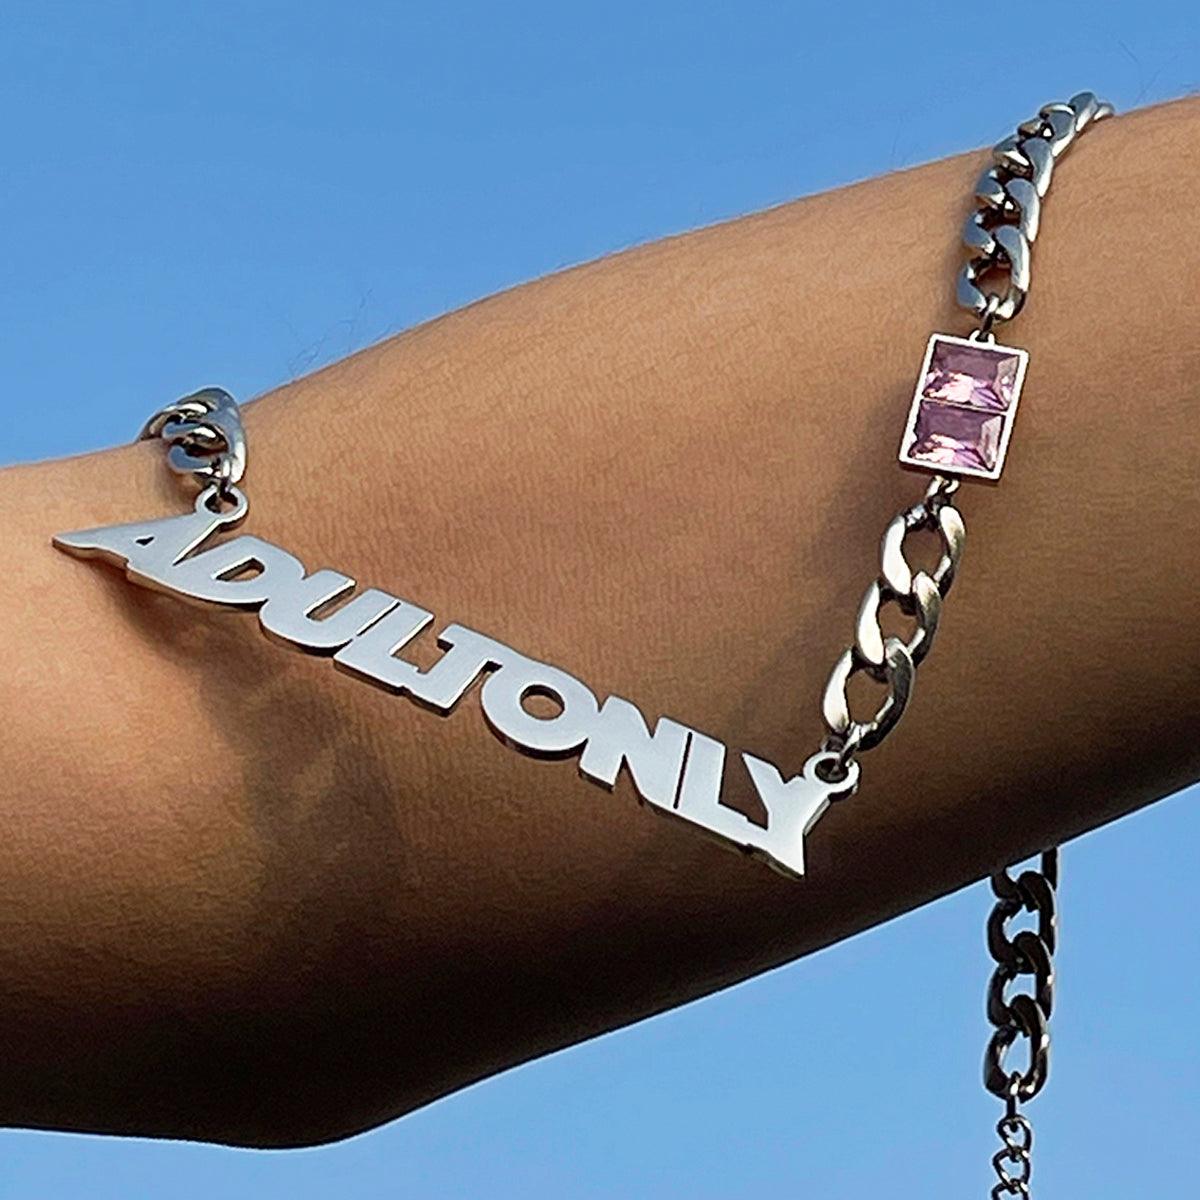 Adultonly Aesthetic Necklace - Aesthetic Clothes Shop